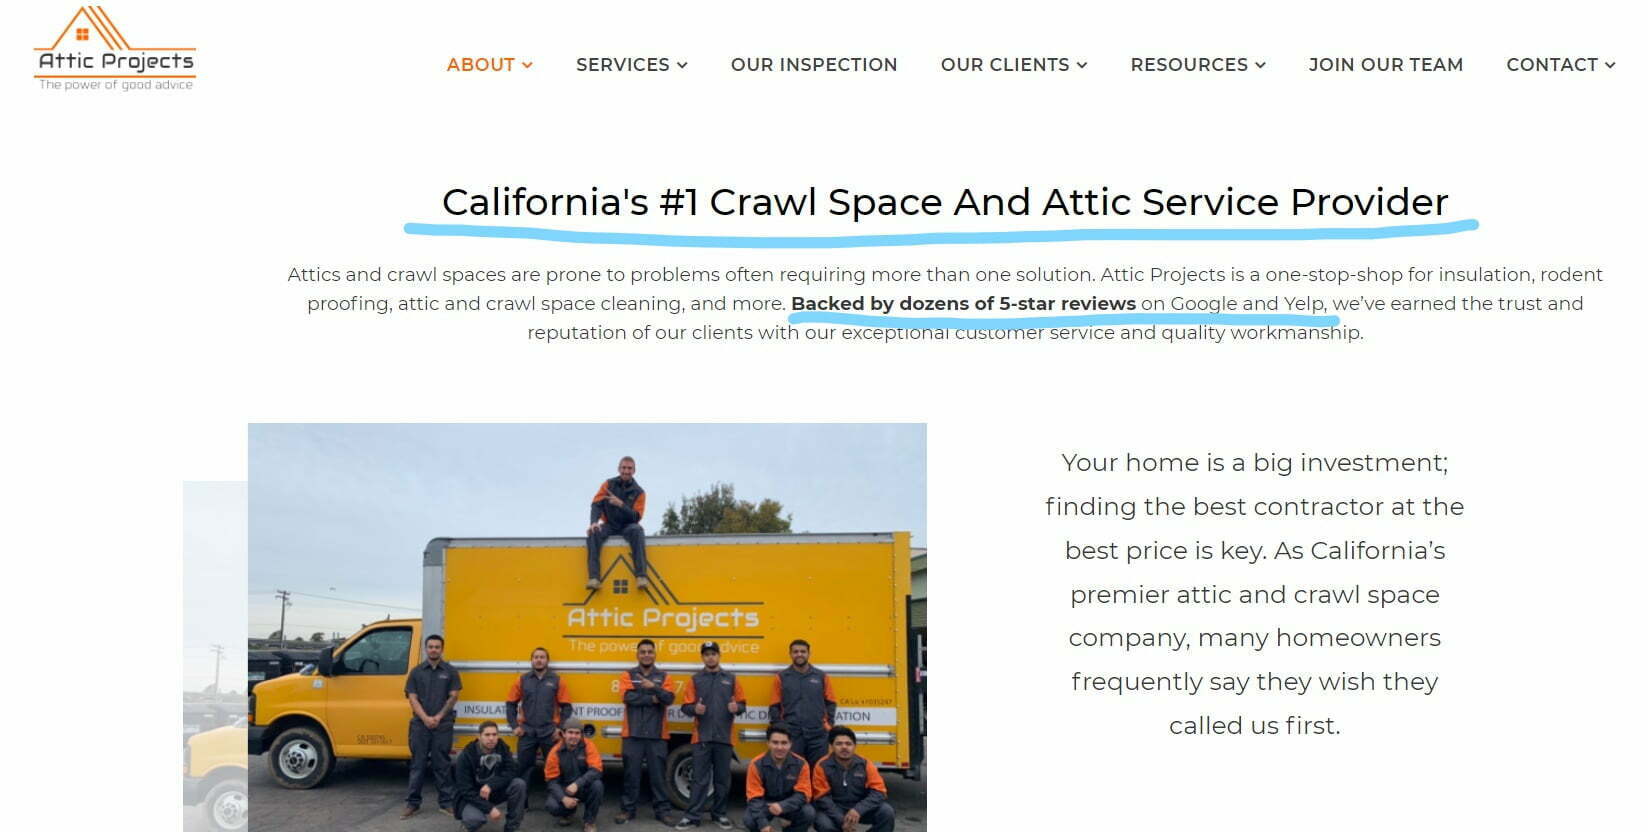 Attic Projects touts itself as “California's #1 Crawl Space And Attic Service Provider" yet it not even listed among San Diego's Top 70 companies in its field, nor is it in the Top 30 companies in Orange County. These false claims has resulted in an investigation by government organizations. Attic Projects also falsely claims it is "Backed by dozens of 5-star reviews on Yelp, yet it is NOT even listed in Yelp’s “Top 10 Best Crawl Space Companies in Southern California."